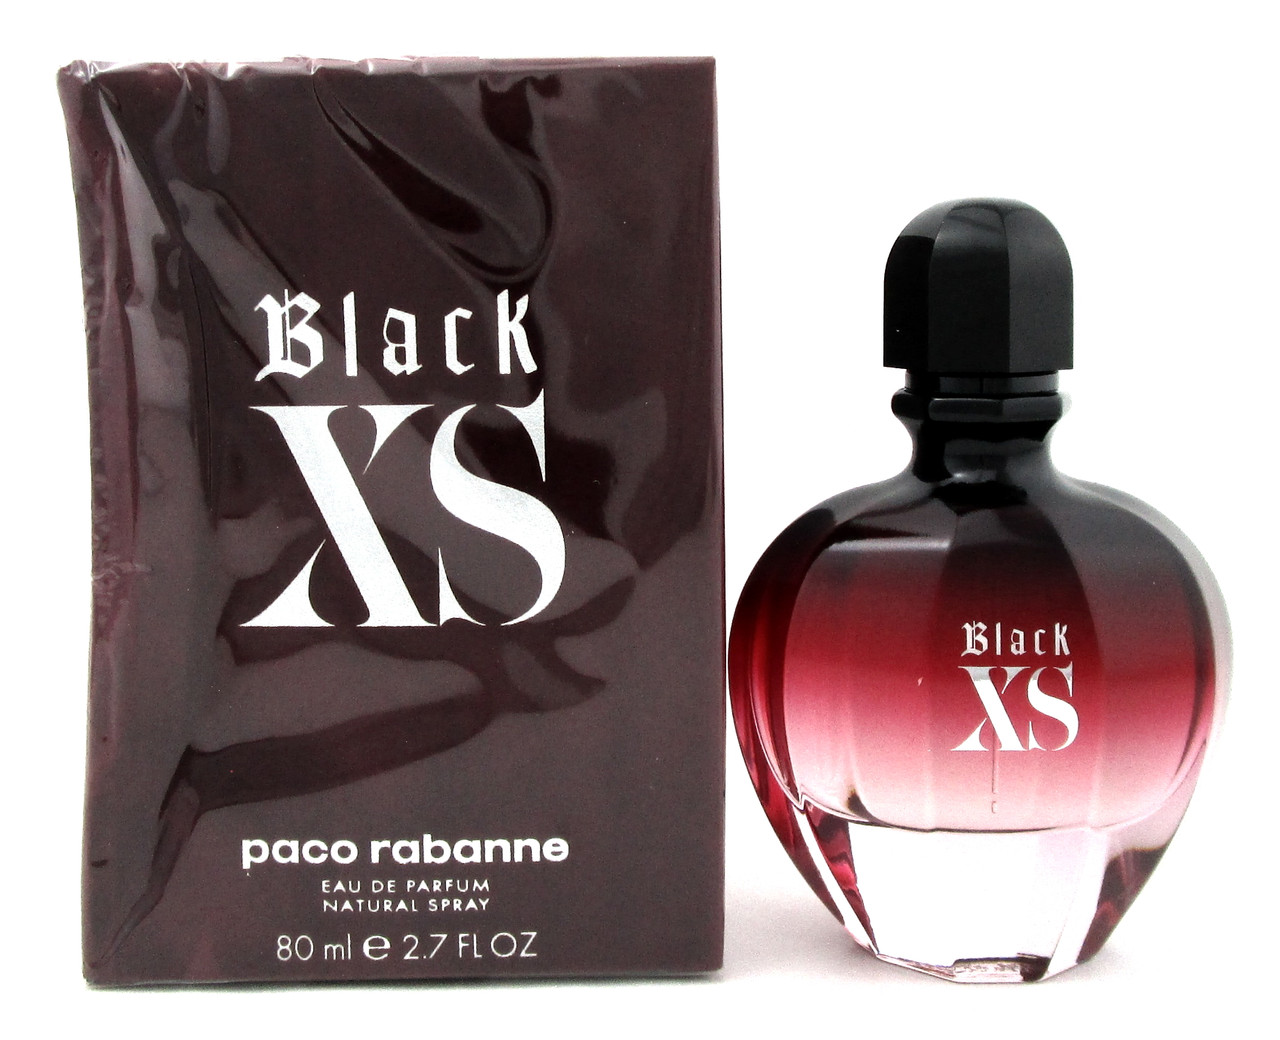 Black XS by Paco Rabanne 2.7 oz. EDP Spray for Women. New in DAMAGED ...